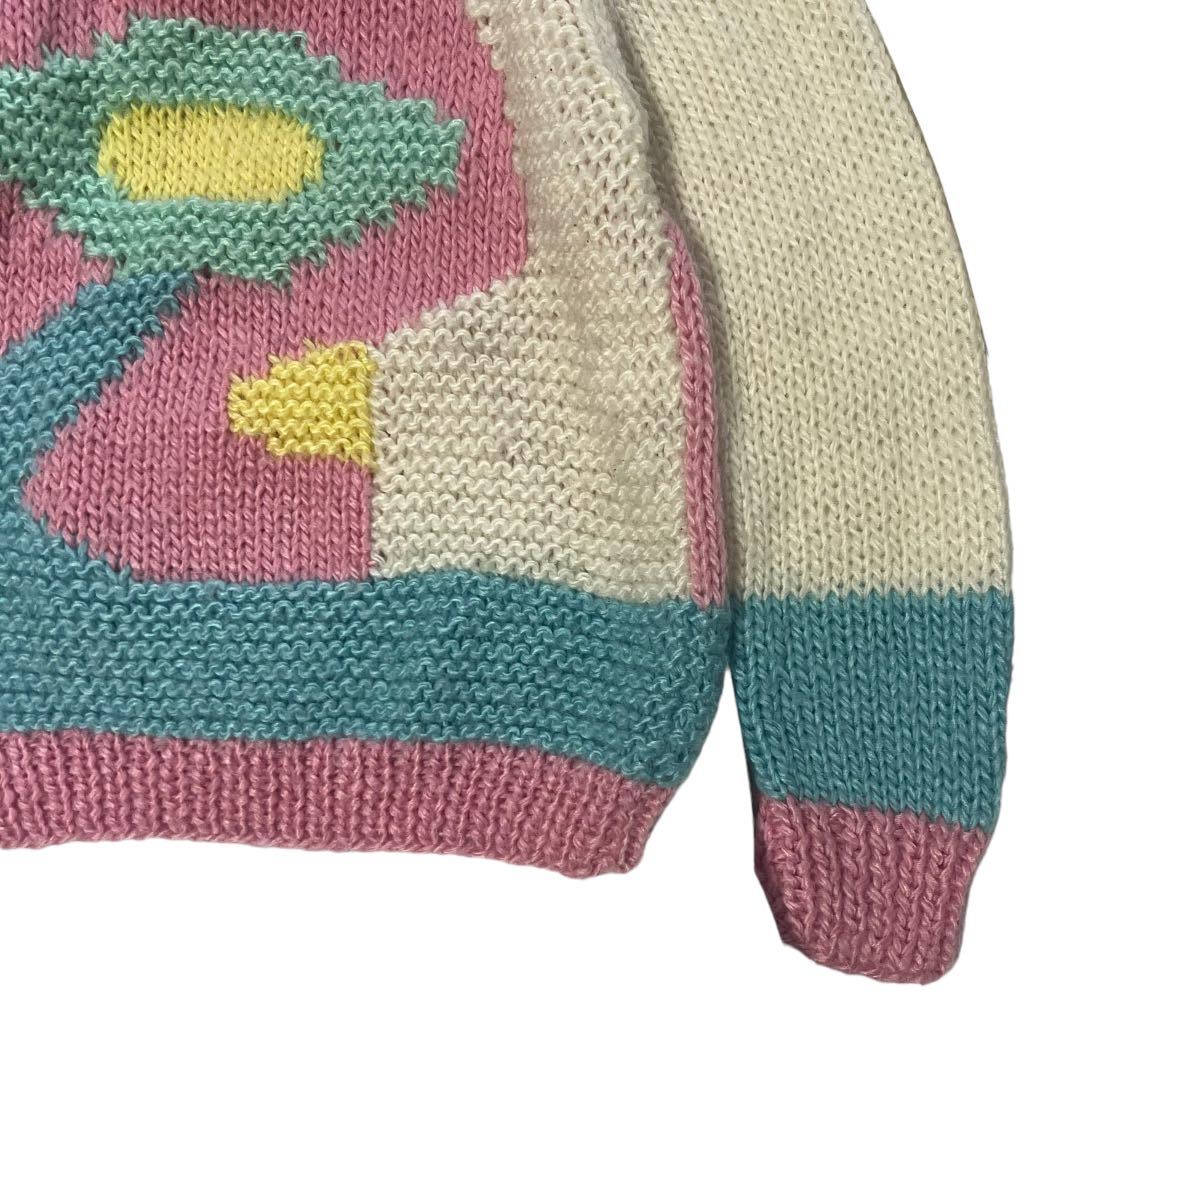 [1980s] Vintage design hand knitted sweater low gauge old clothes euro rare hand-knitted art 